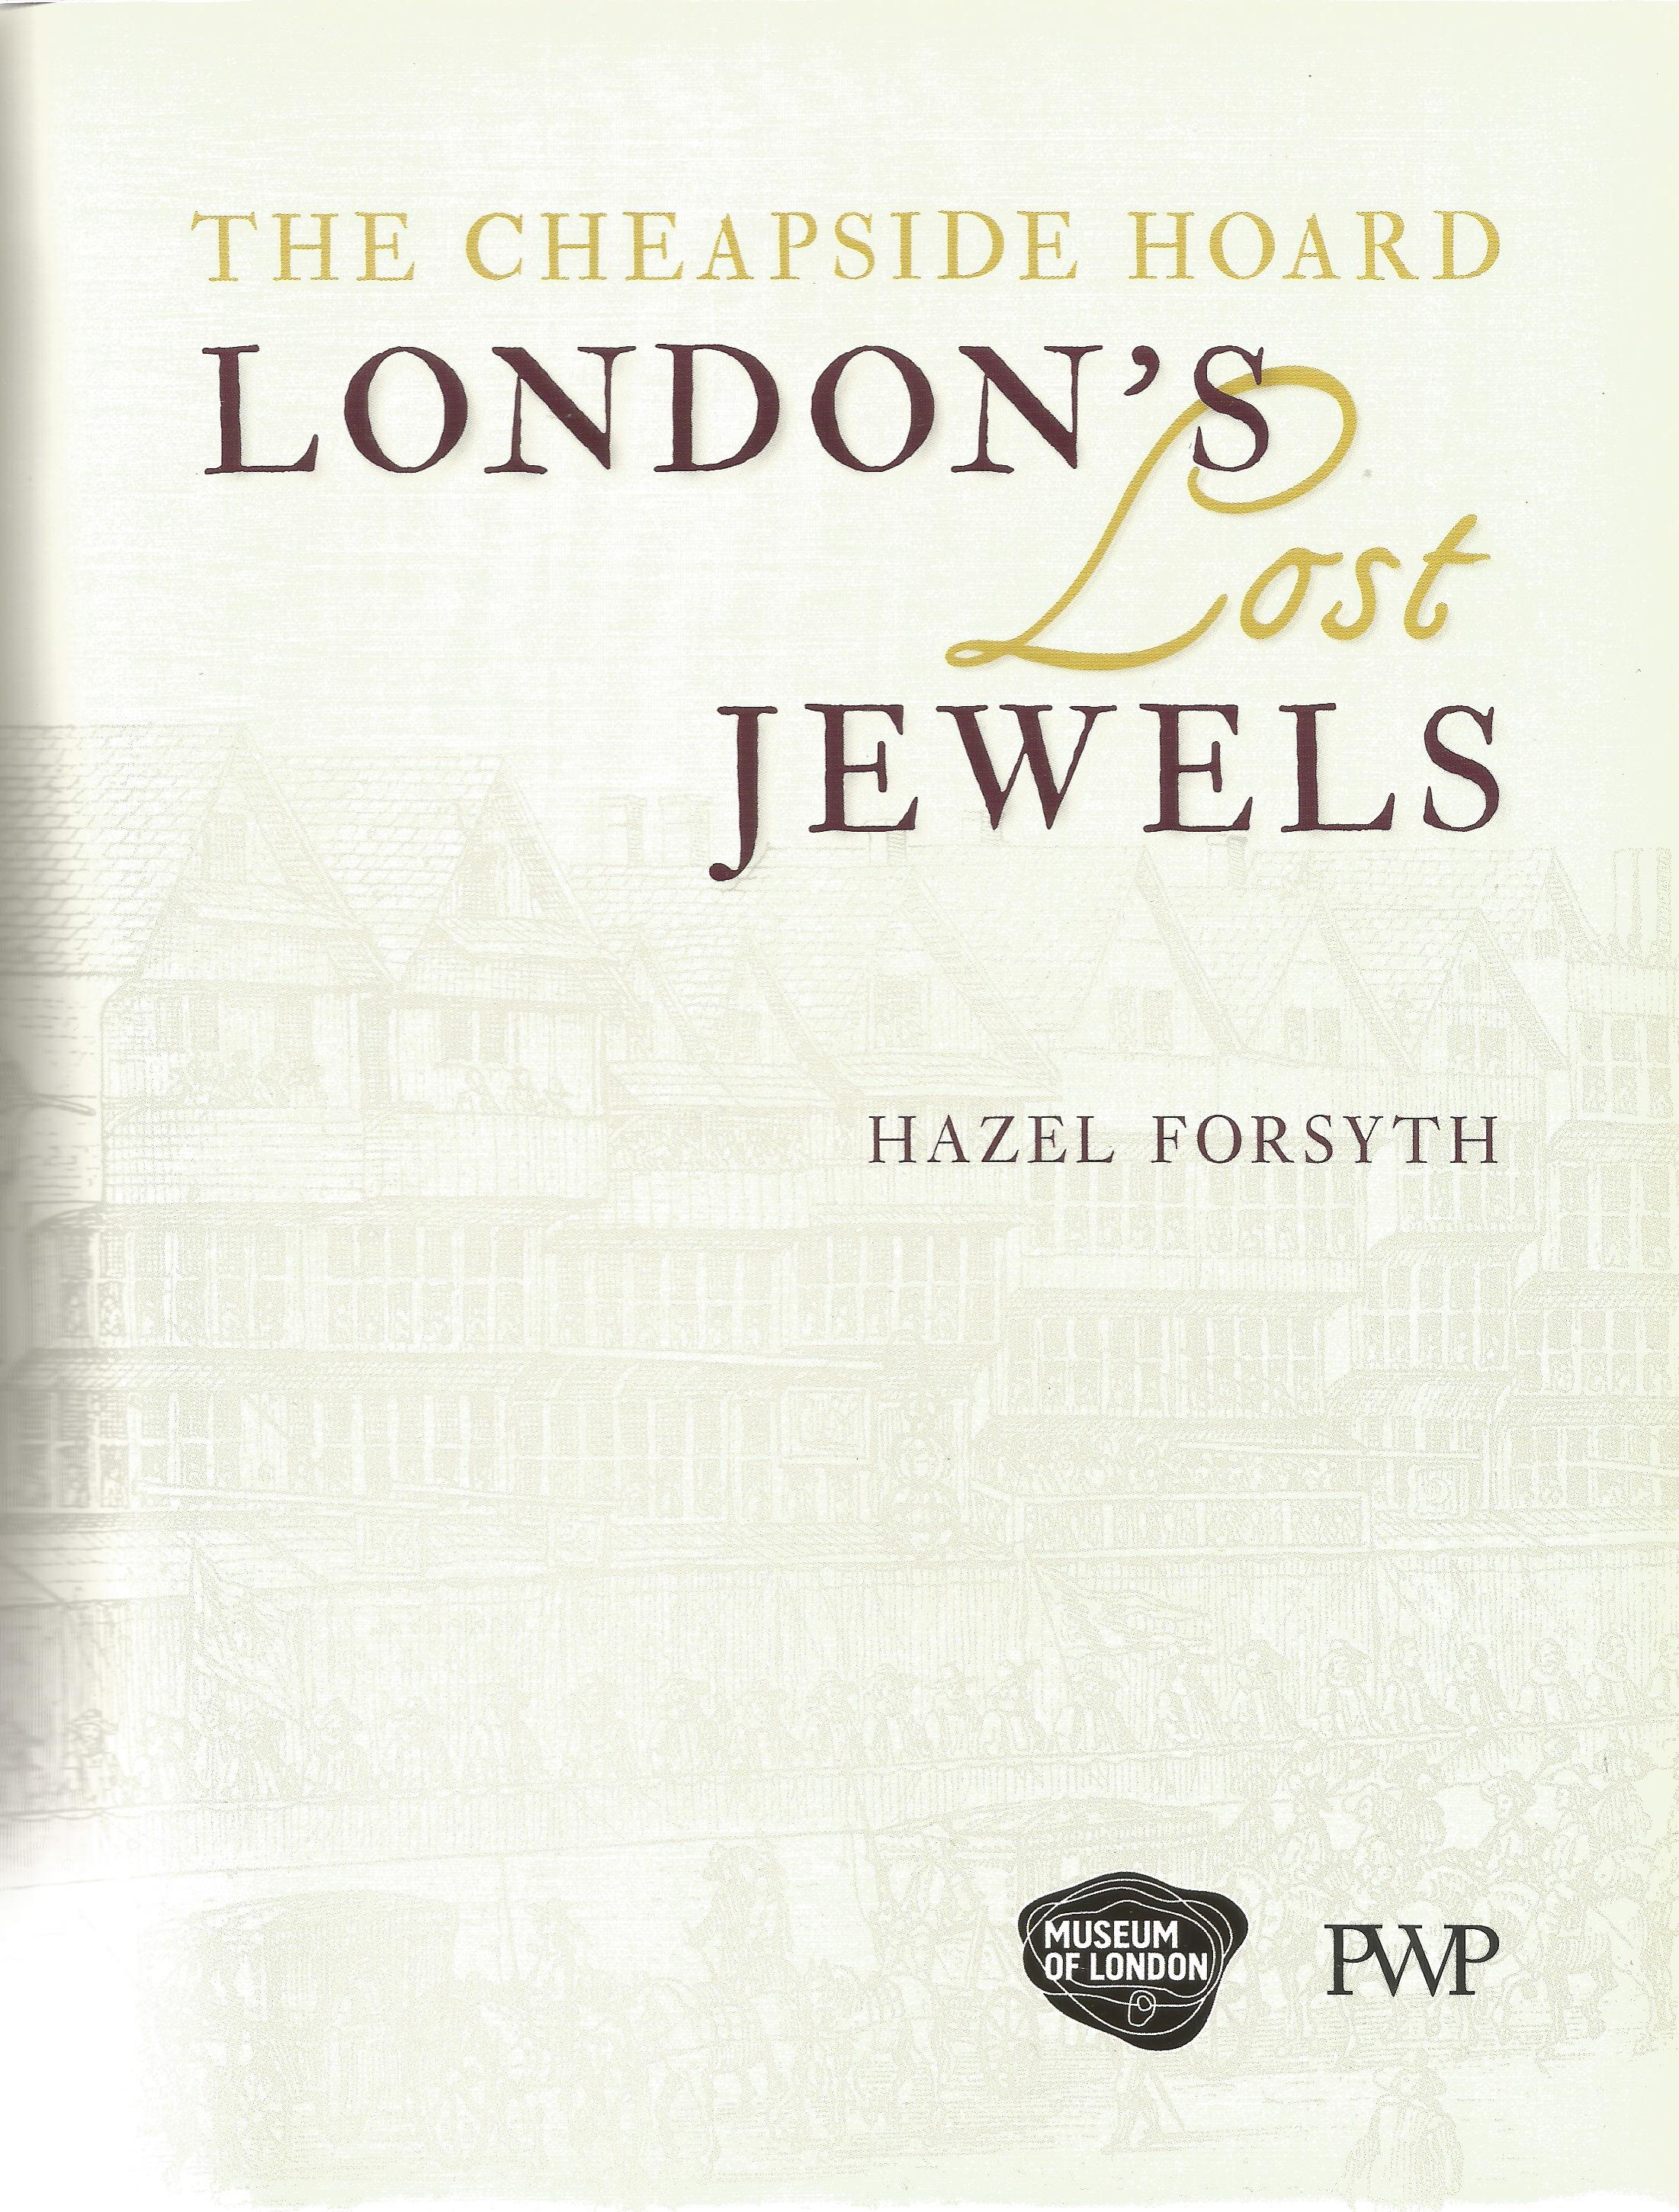 The Cheapside Hoard London's Lost Jewels by Hazel Forsyth Softback Book First Edition 2014 published - Image 2 of 3